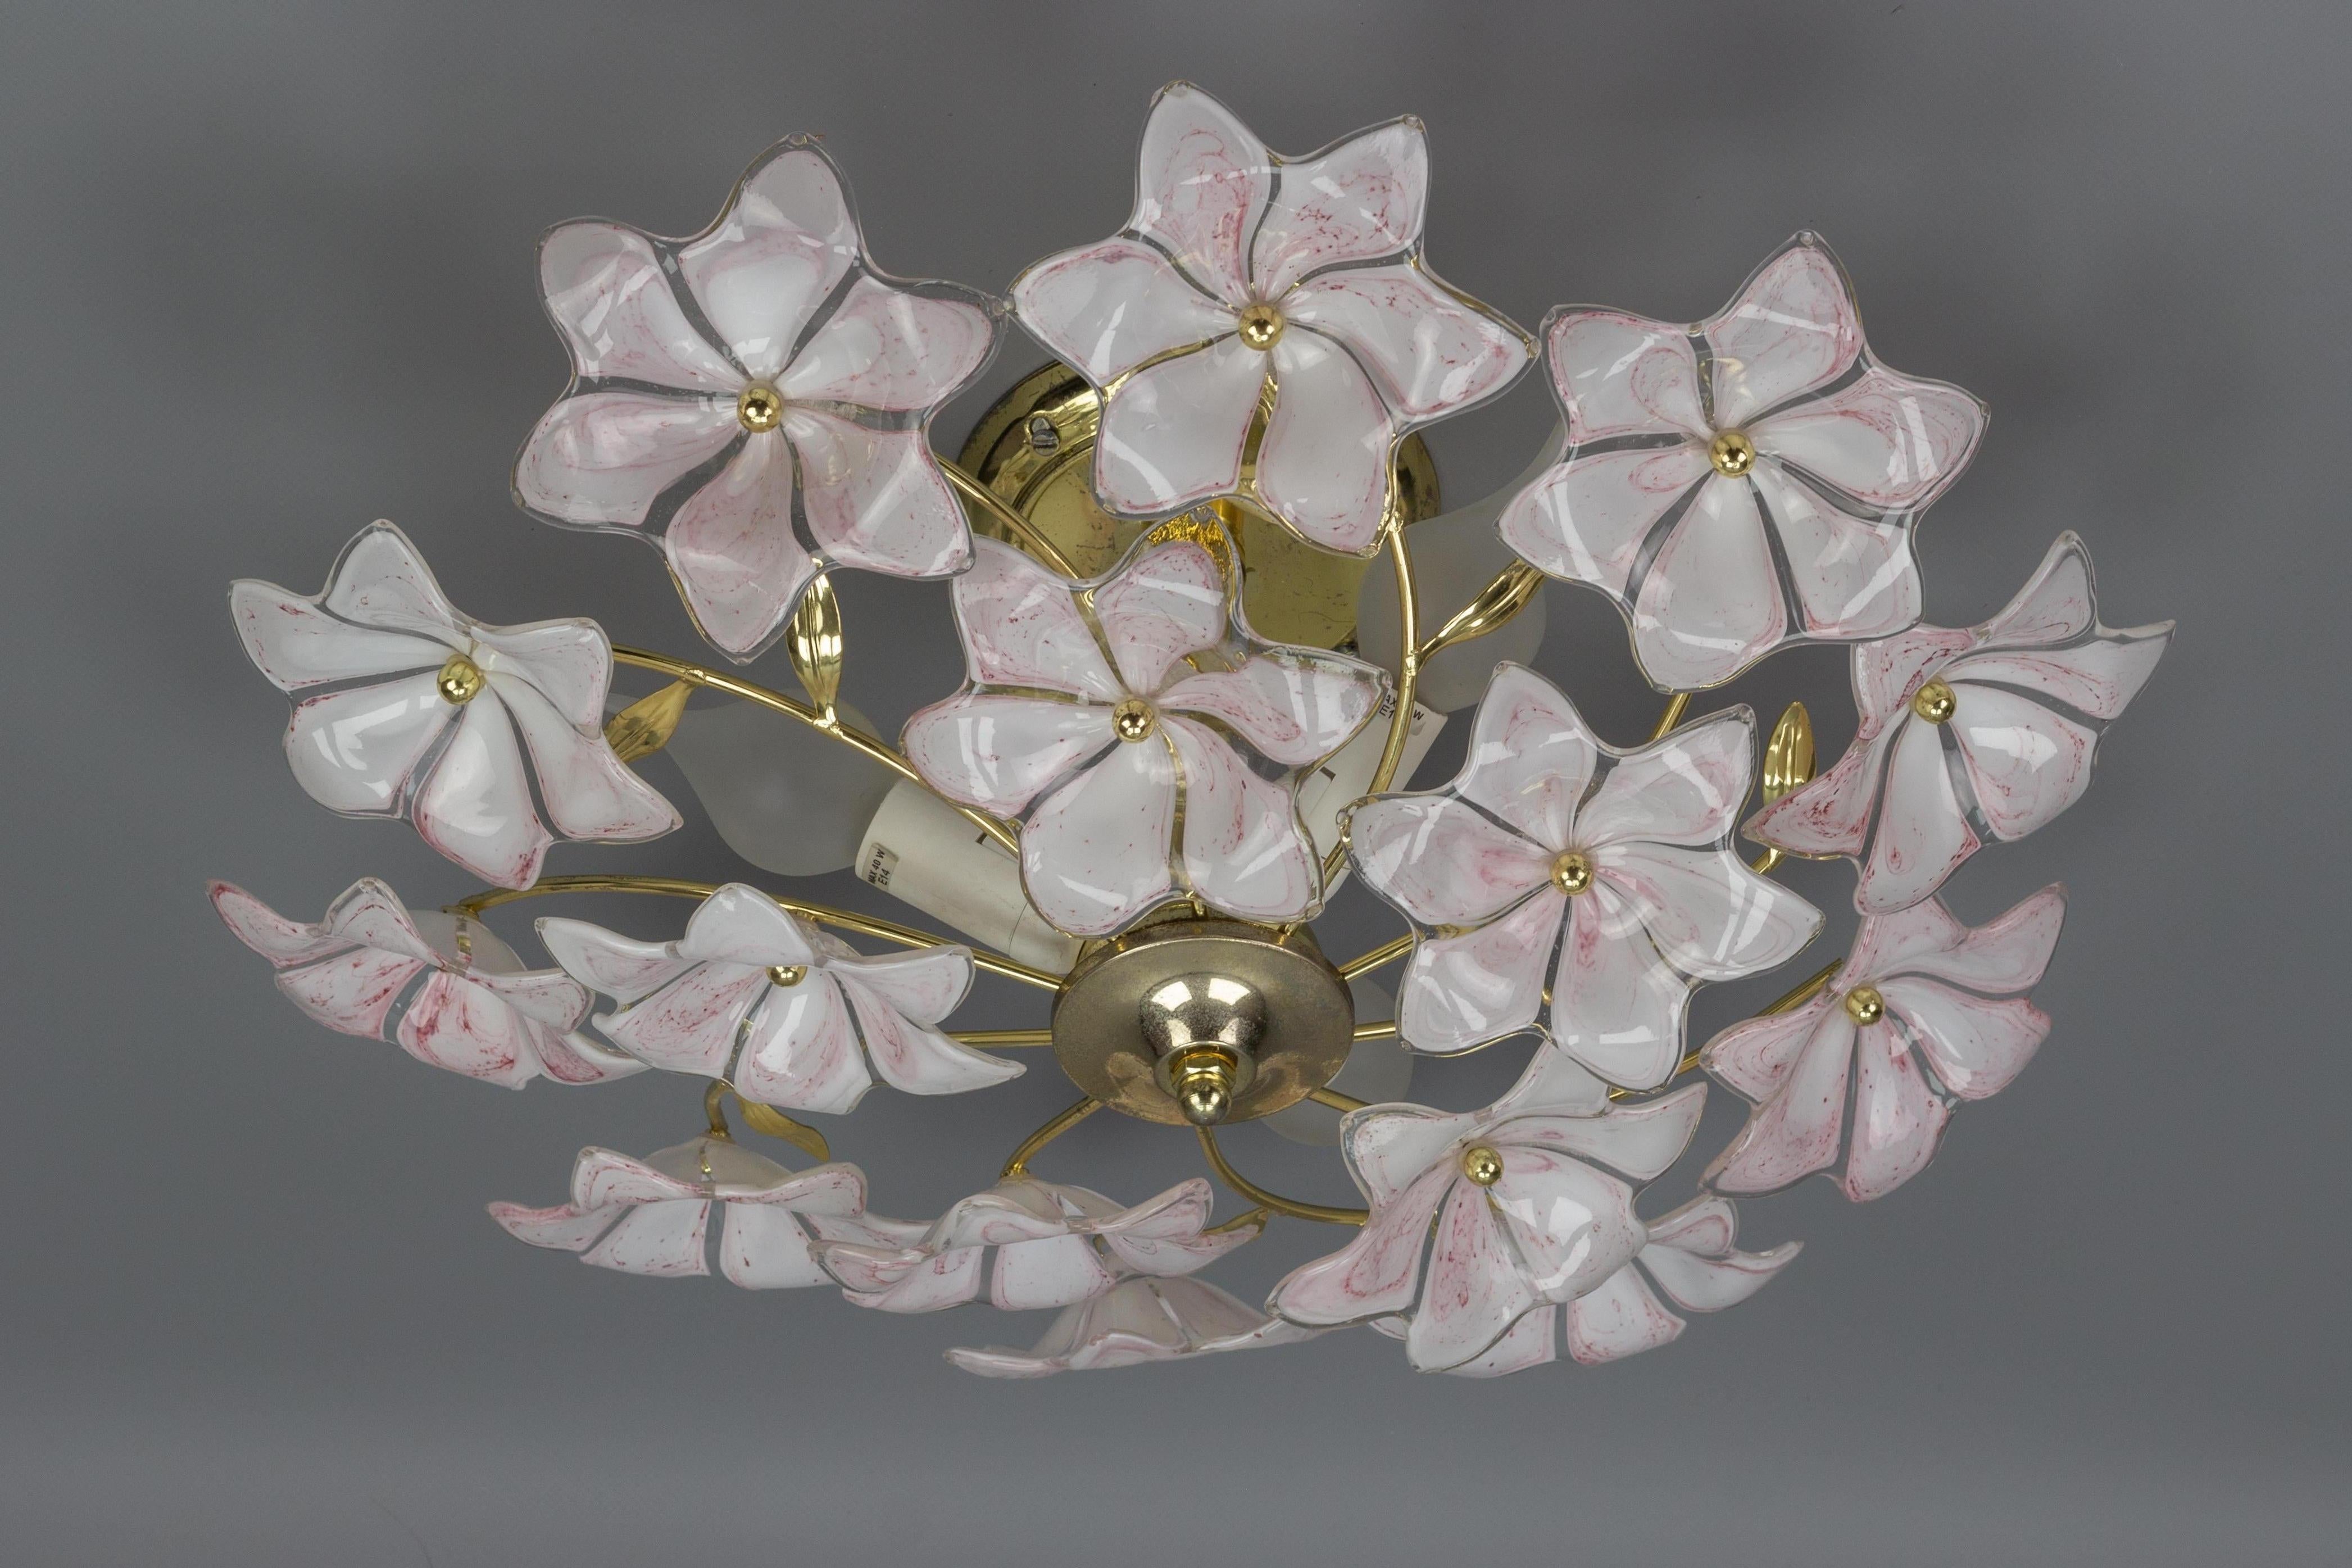 Adorable three-light ceiling light or chandelier with fifteen white and pink glass flowers. Each beautiful Murano glass flower is hand blown and therefore all fifteen are slightly different.
Three sockets for E14 size light bulbs.
Dimensions: